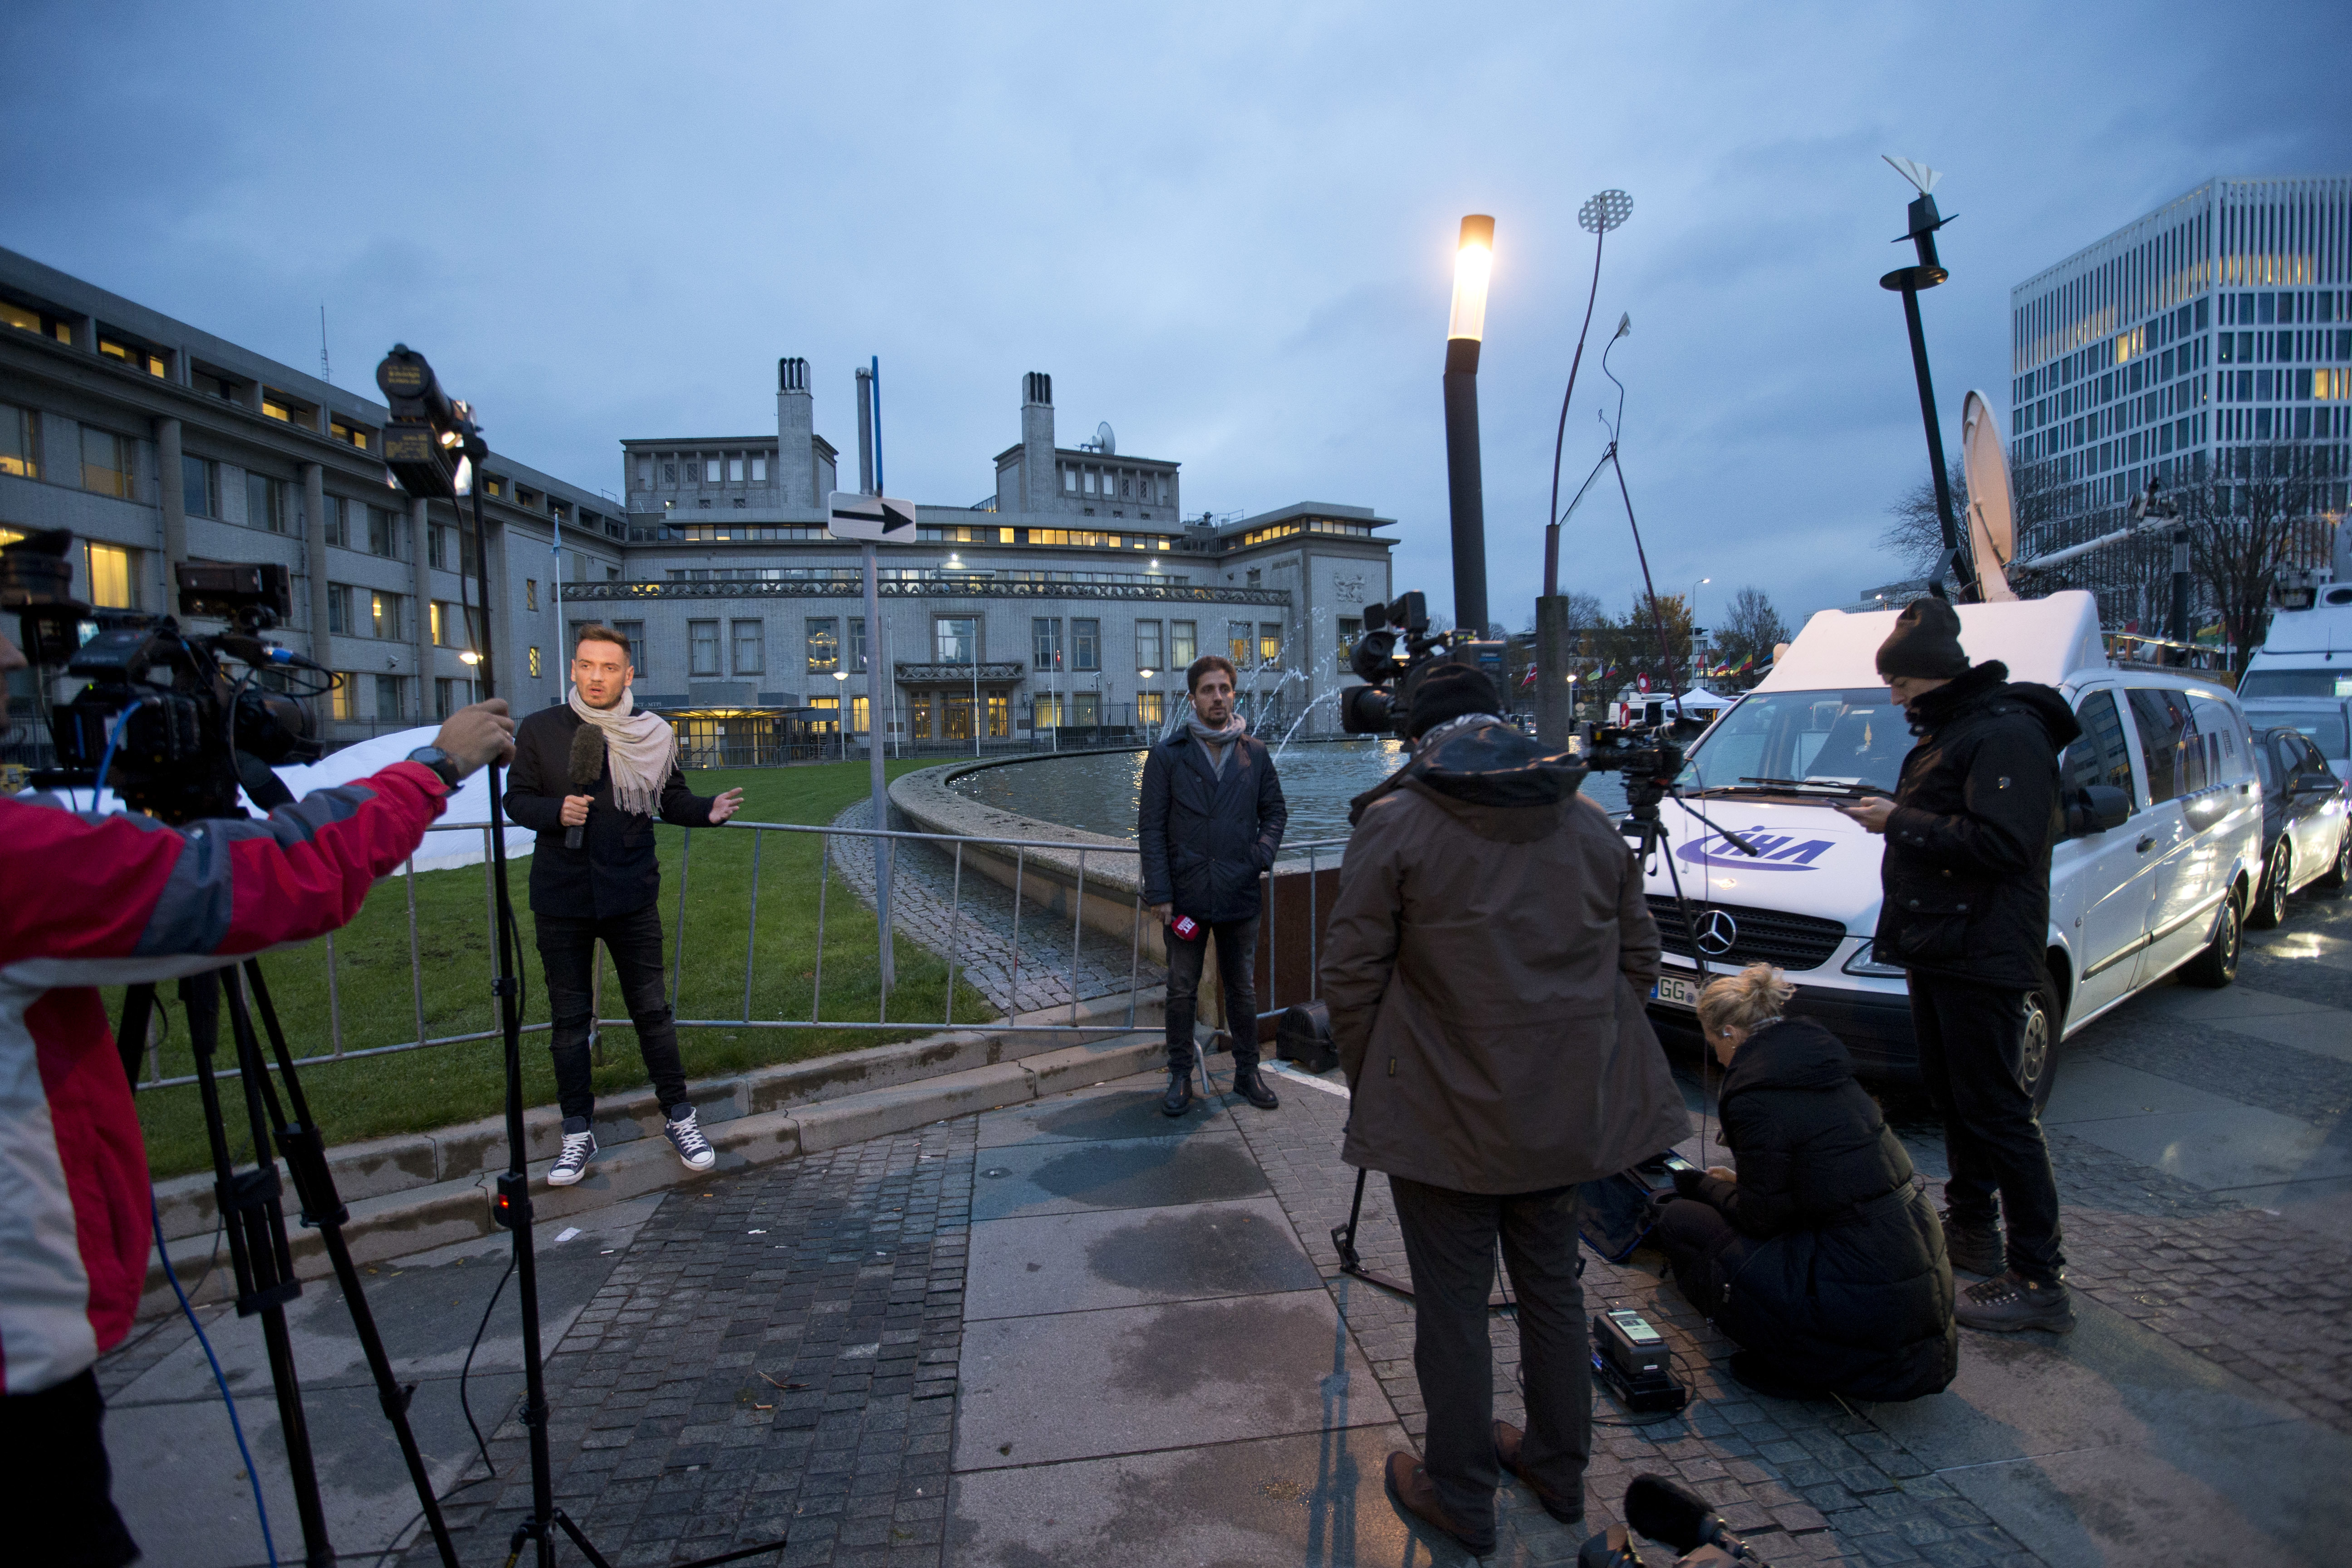 Satellite trucks and cameras are set up outside the Yugoslav War Crimes Tribunal, rear center, where the court is scheduled to hand down the verdict in the genocide case against Bosnian Serb military chief Ratko Mladic, in The Hague, Netherlands, Wednesday, Nov. 22, 2017. Mladic's trial is the last major case for the Netherlands-based tribunal for former Yugoslavia, which was set up in 1993 to prosecute those most responsible for the worst carnage in Europe since World War II. (AP Photo/Peter Dejong)